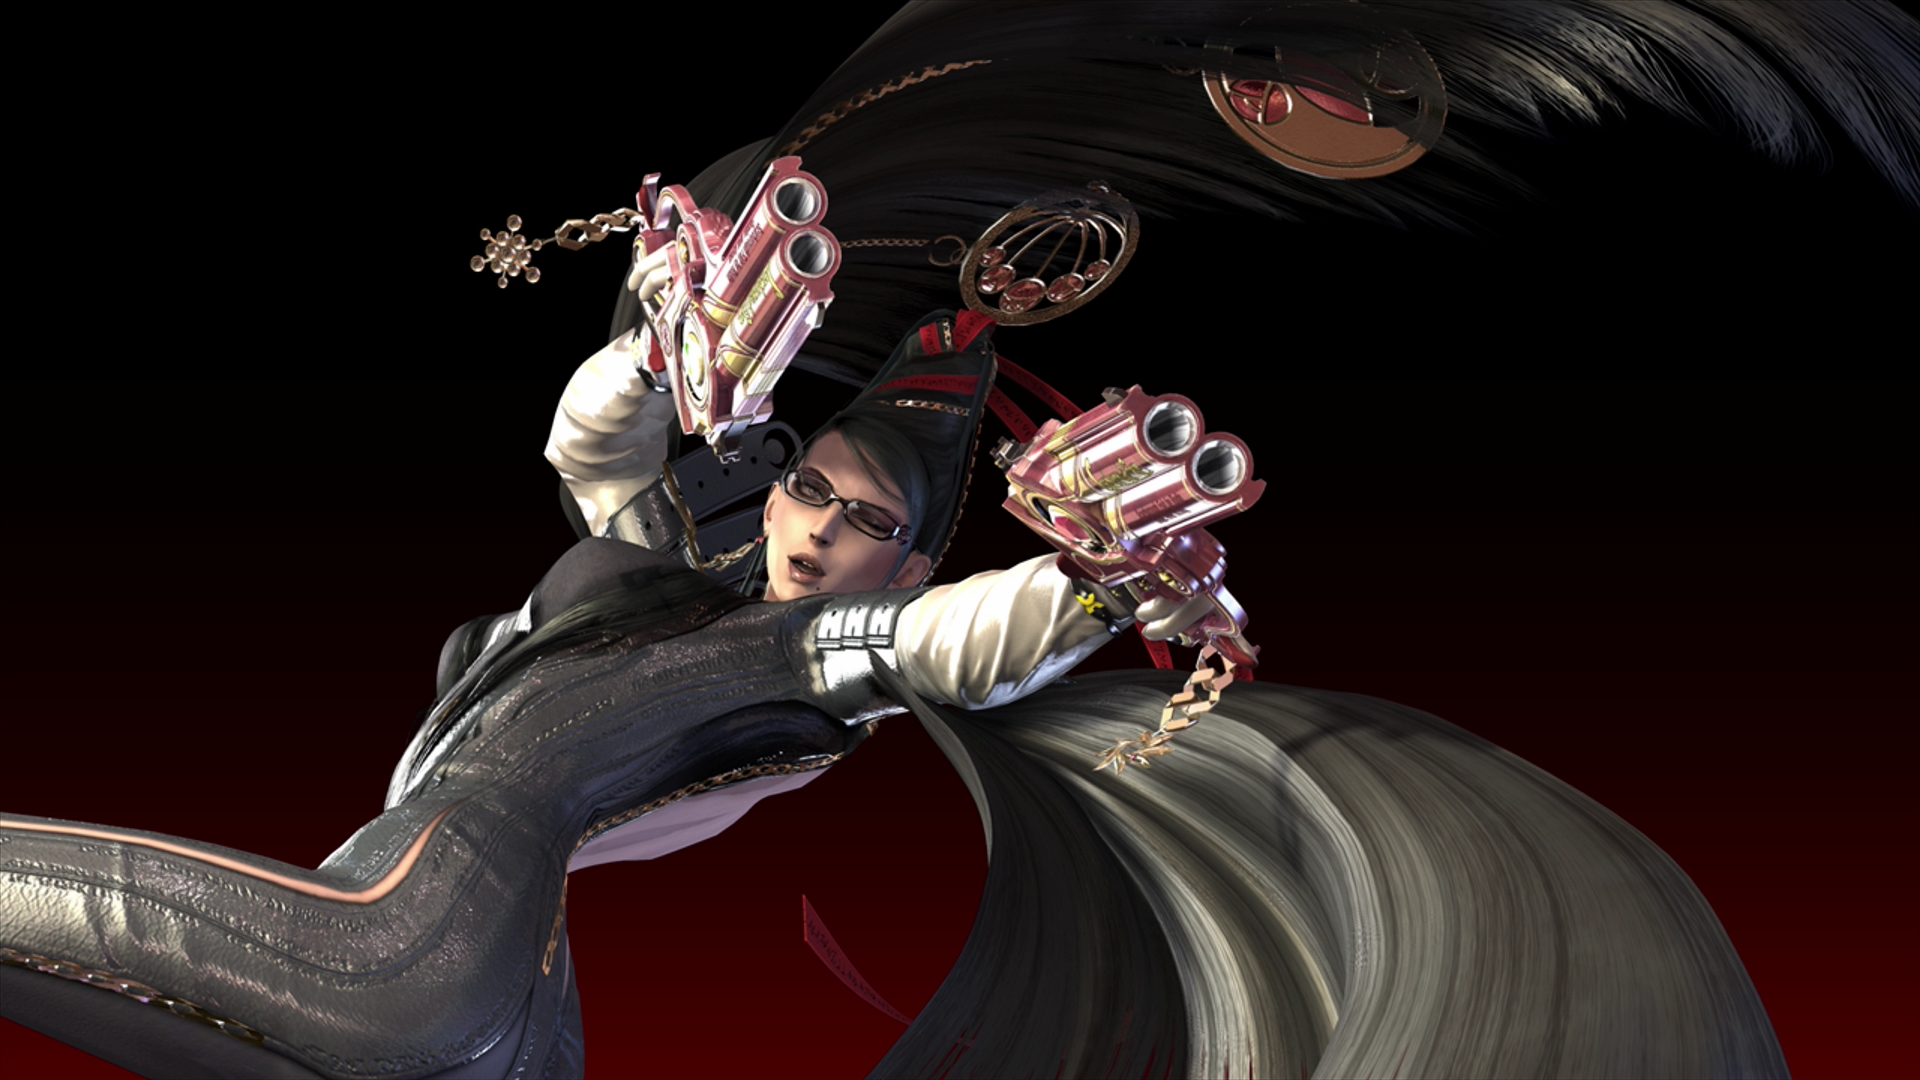 Bayonetta Wallpapers Pictures Images.